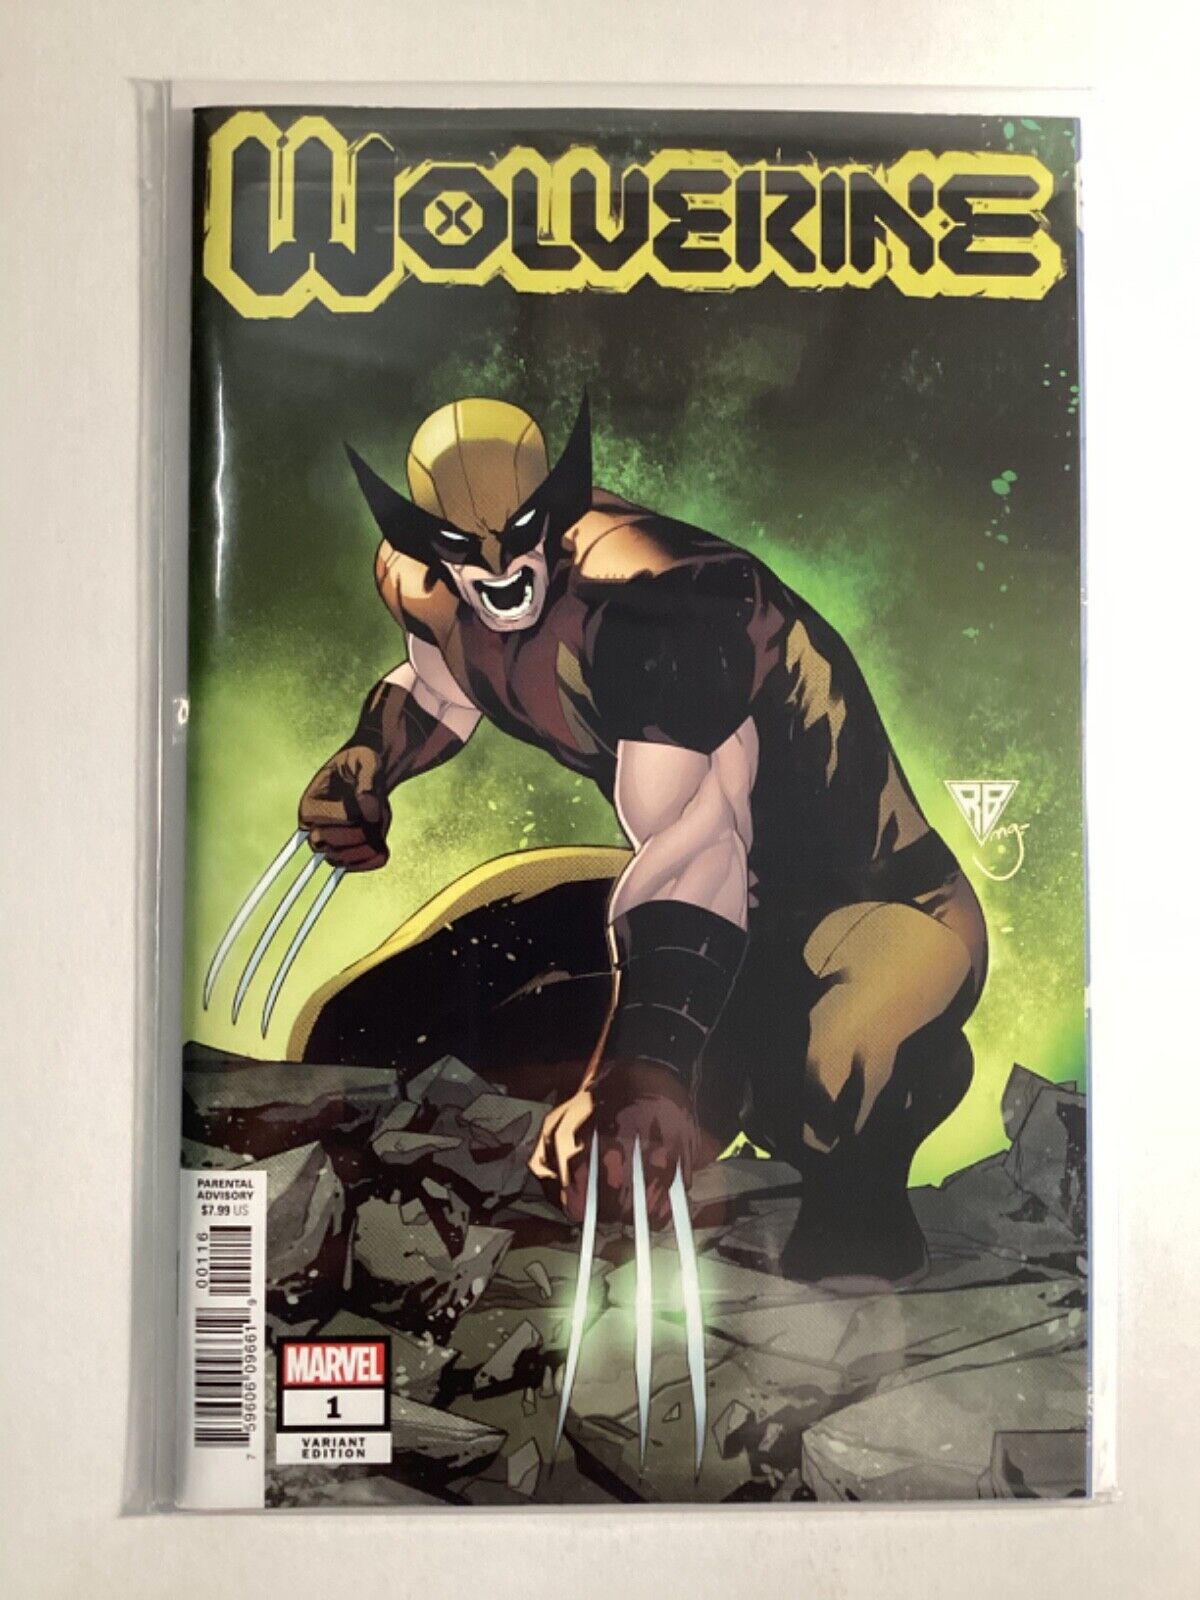 WOLVERINE 2020 6th Series #1I 1:25 VF- 7.5 Cover: R.B.Silva🥇1st App Of LOUISE🥇